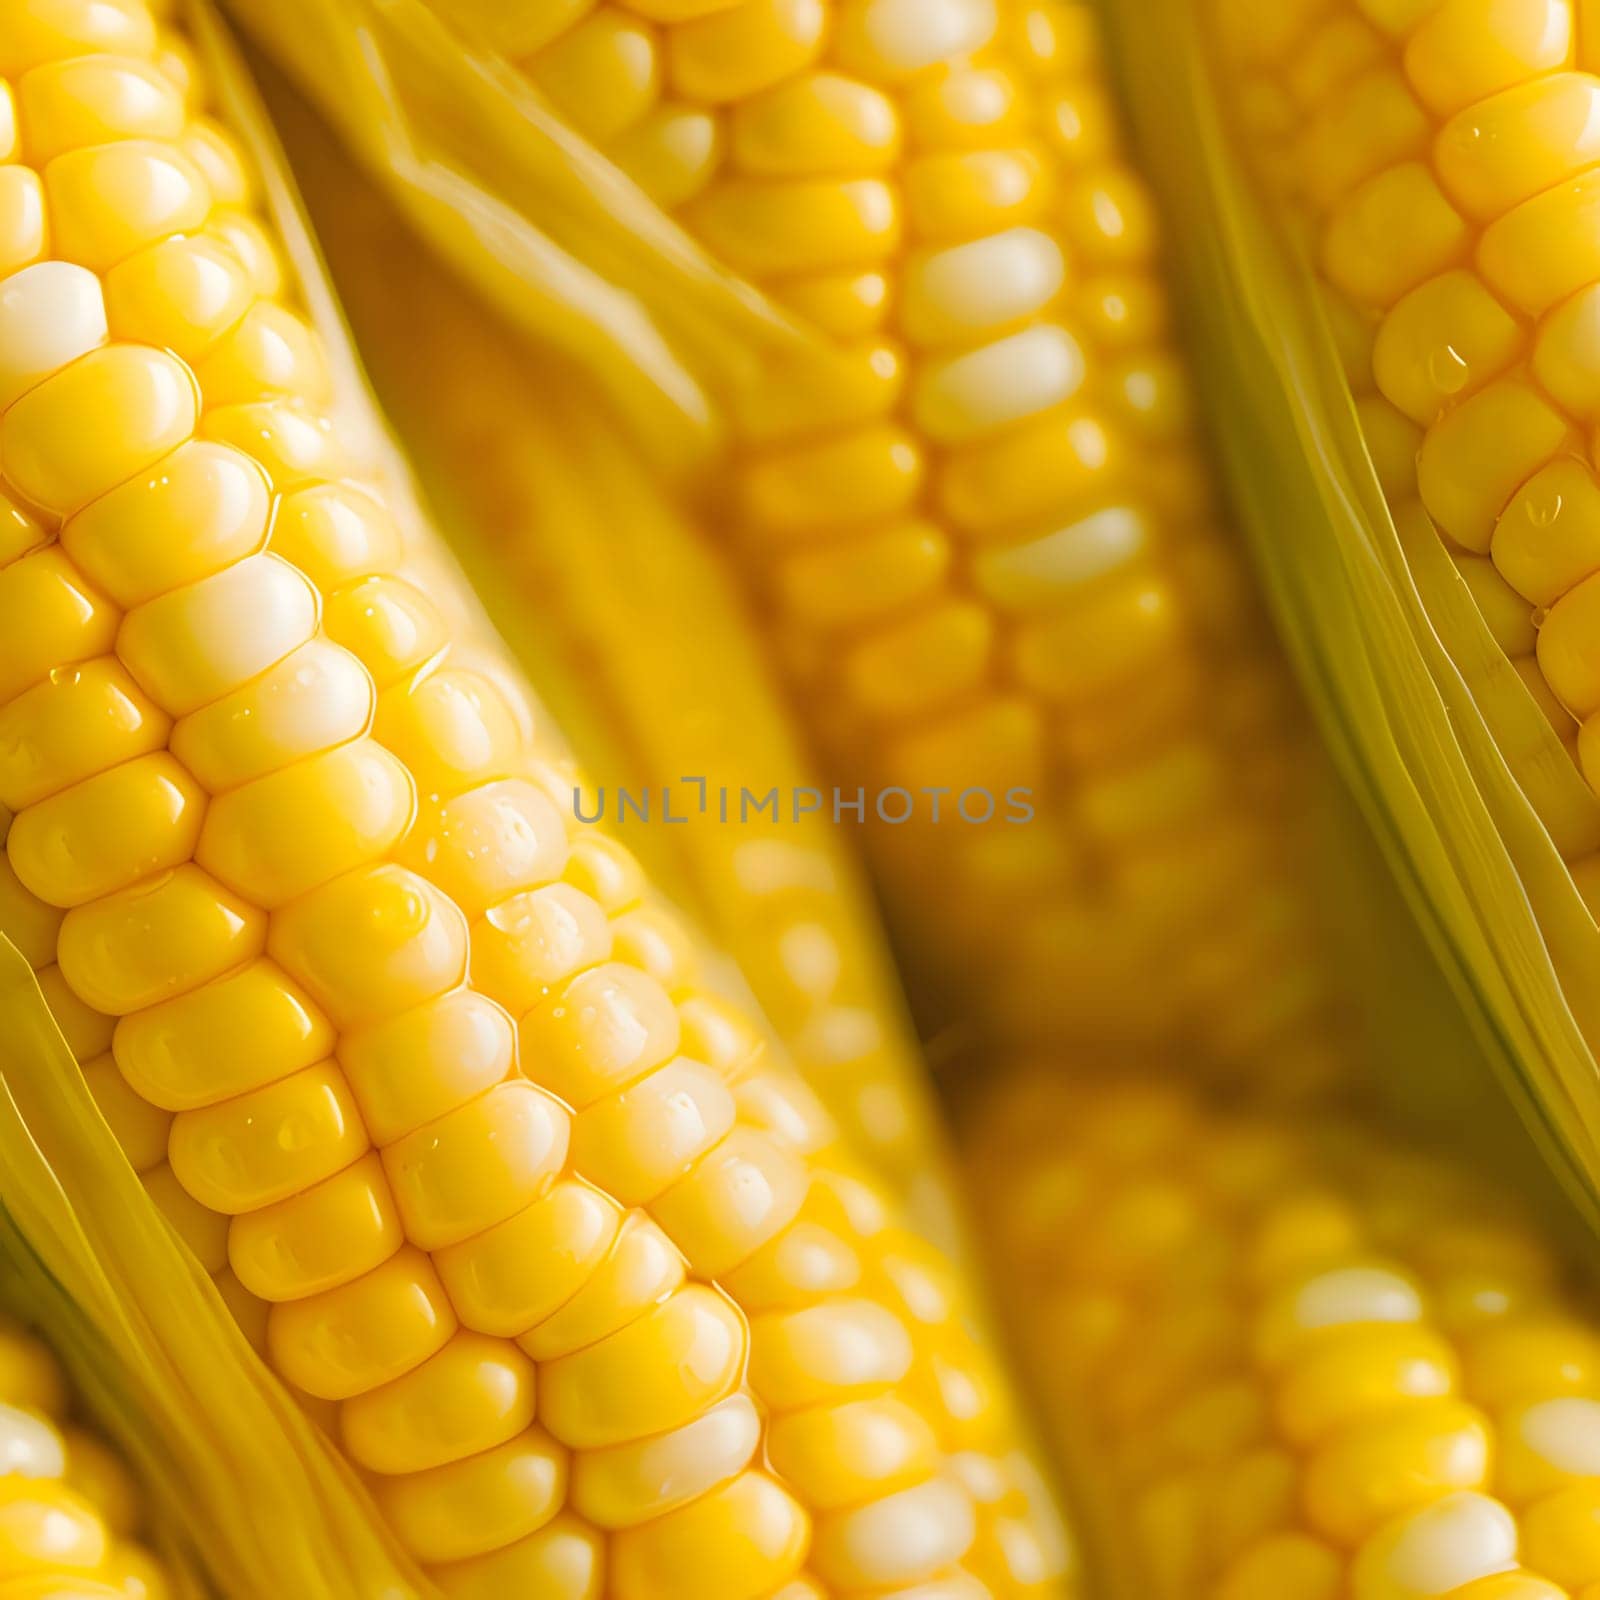 Stacked yellow corn cobs. Background. Corn as a dish of thanksgiving for the harvest. An atmosphere of joy and celebration.